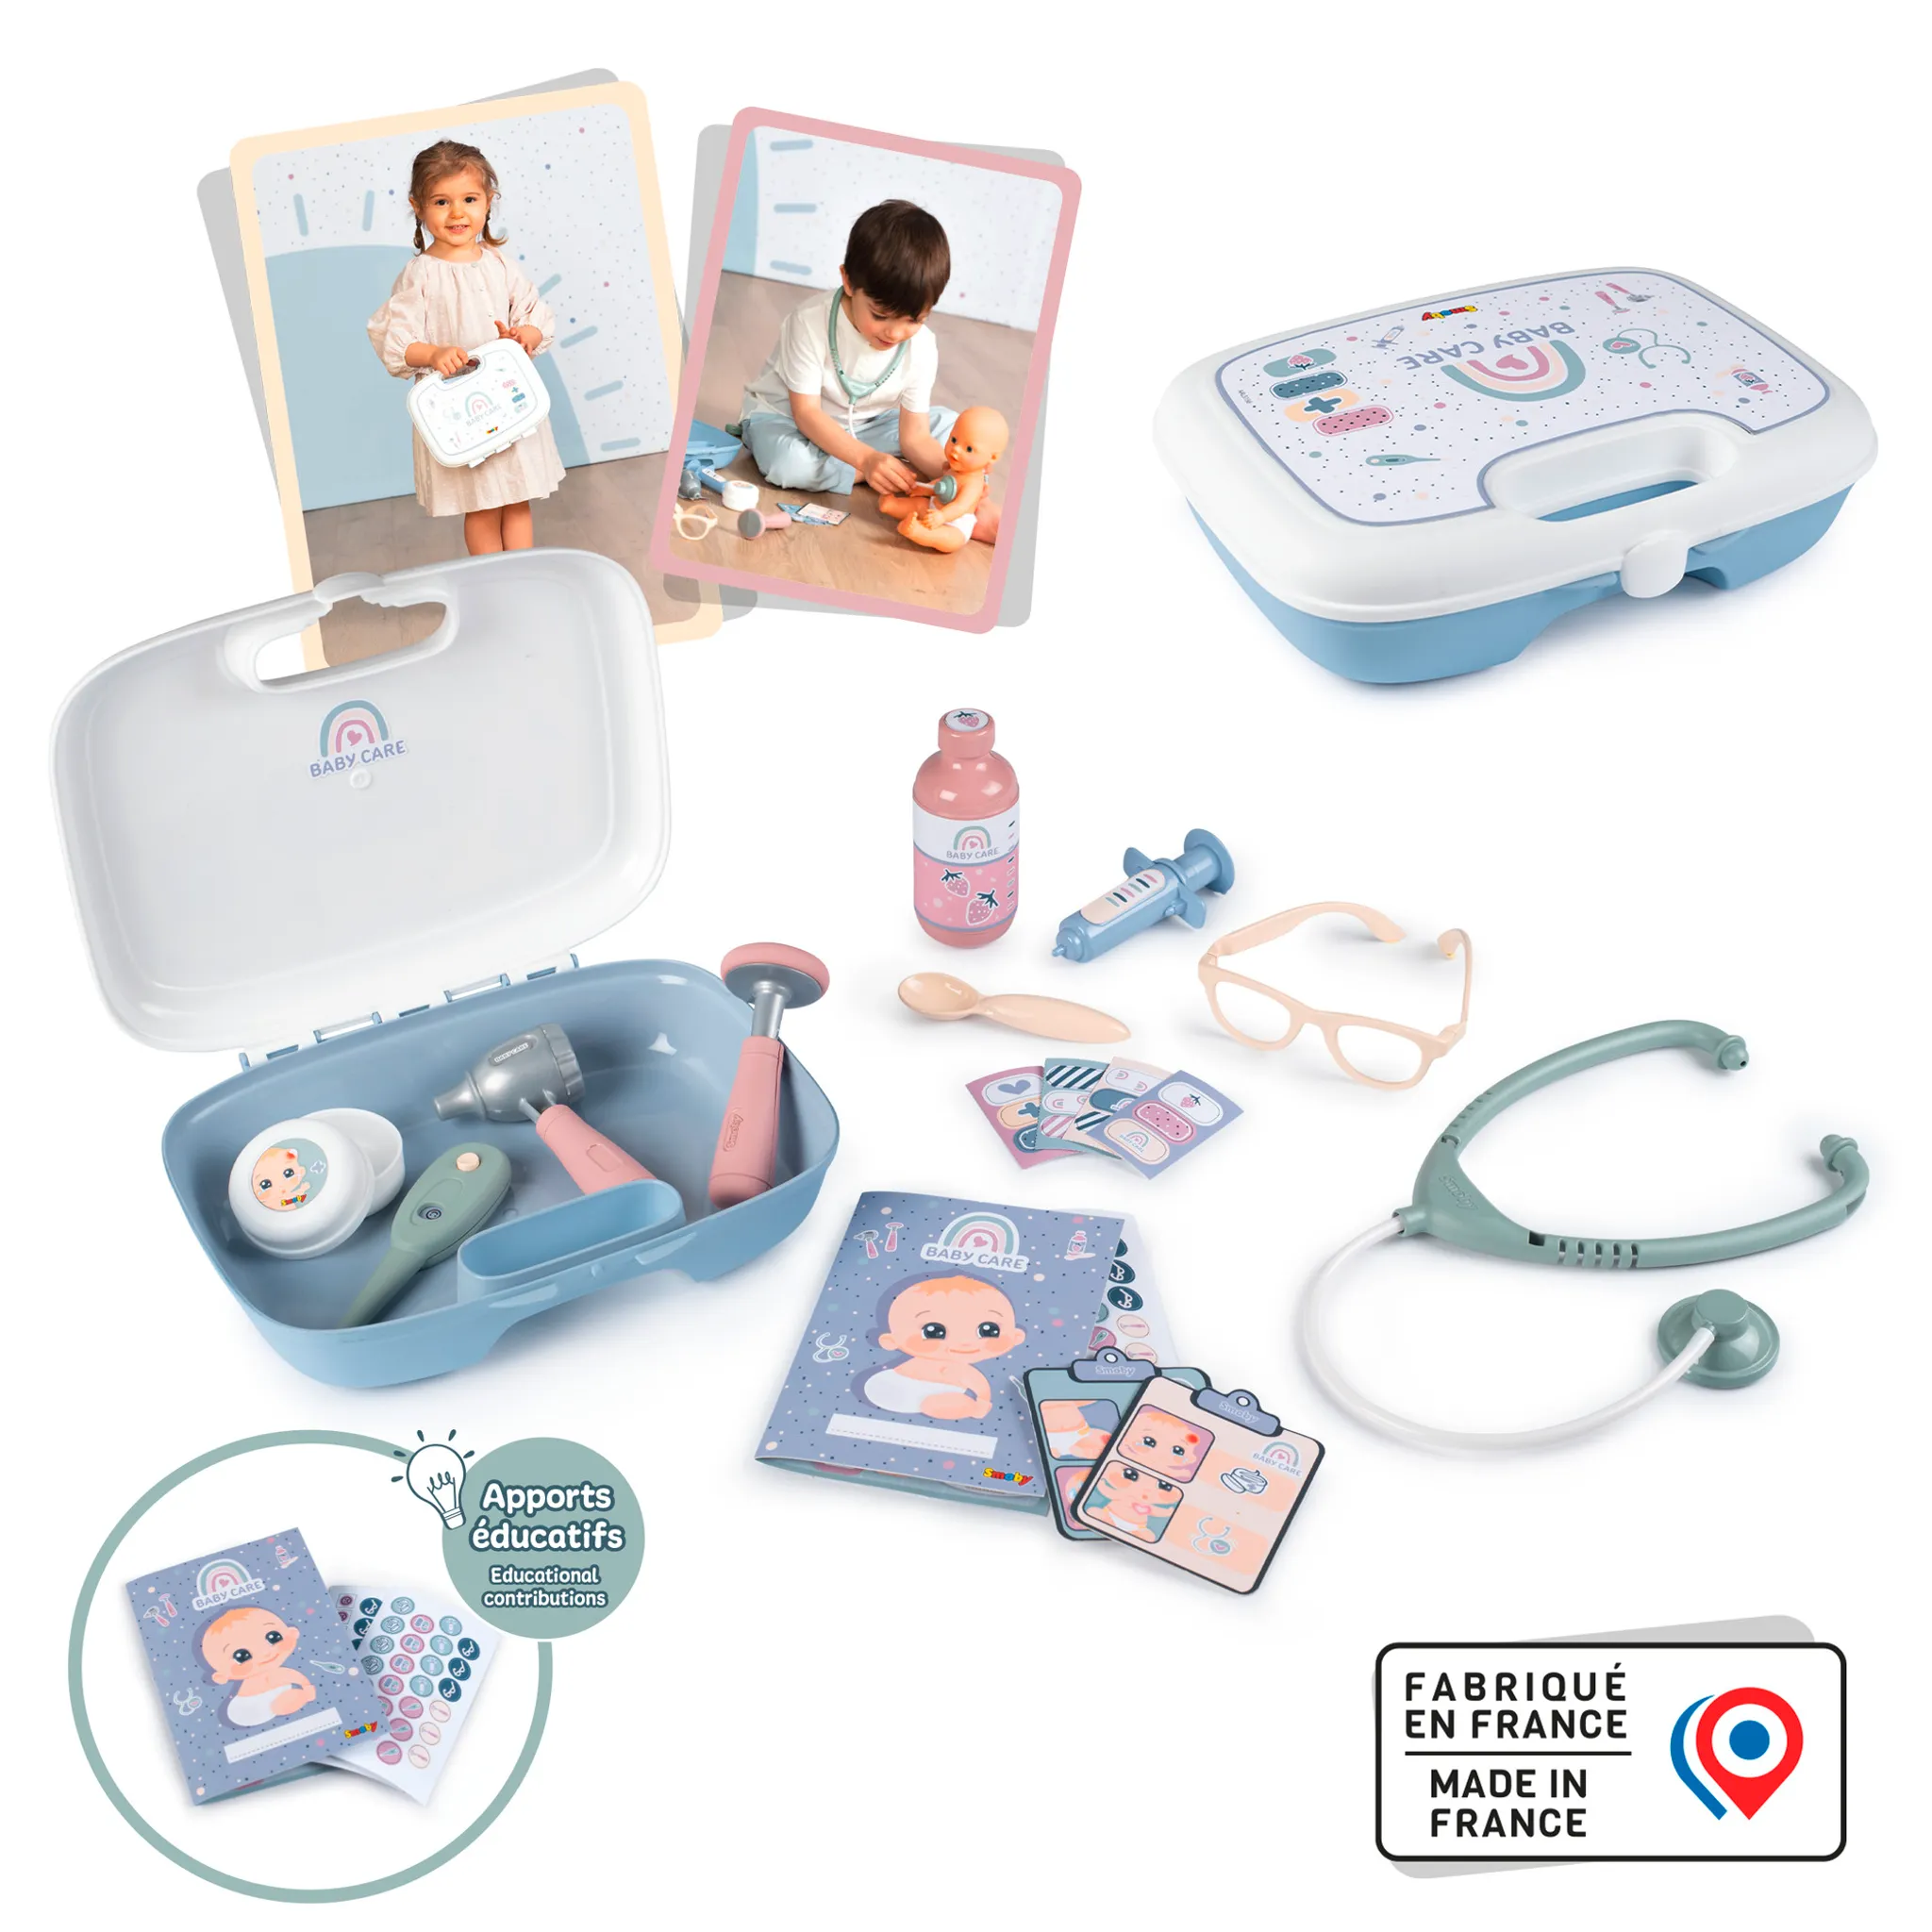 Care Smoby Doktorkoffer Arztspielzeug Baby